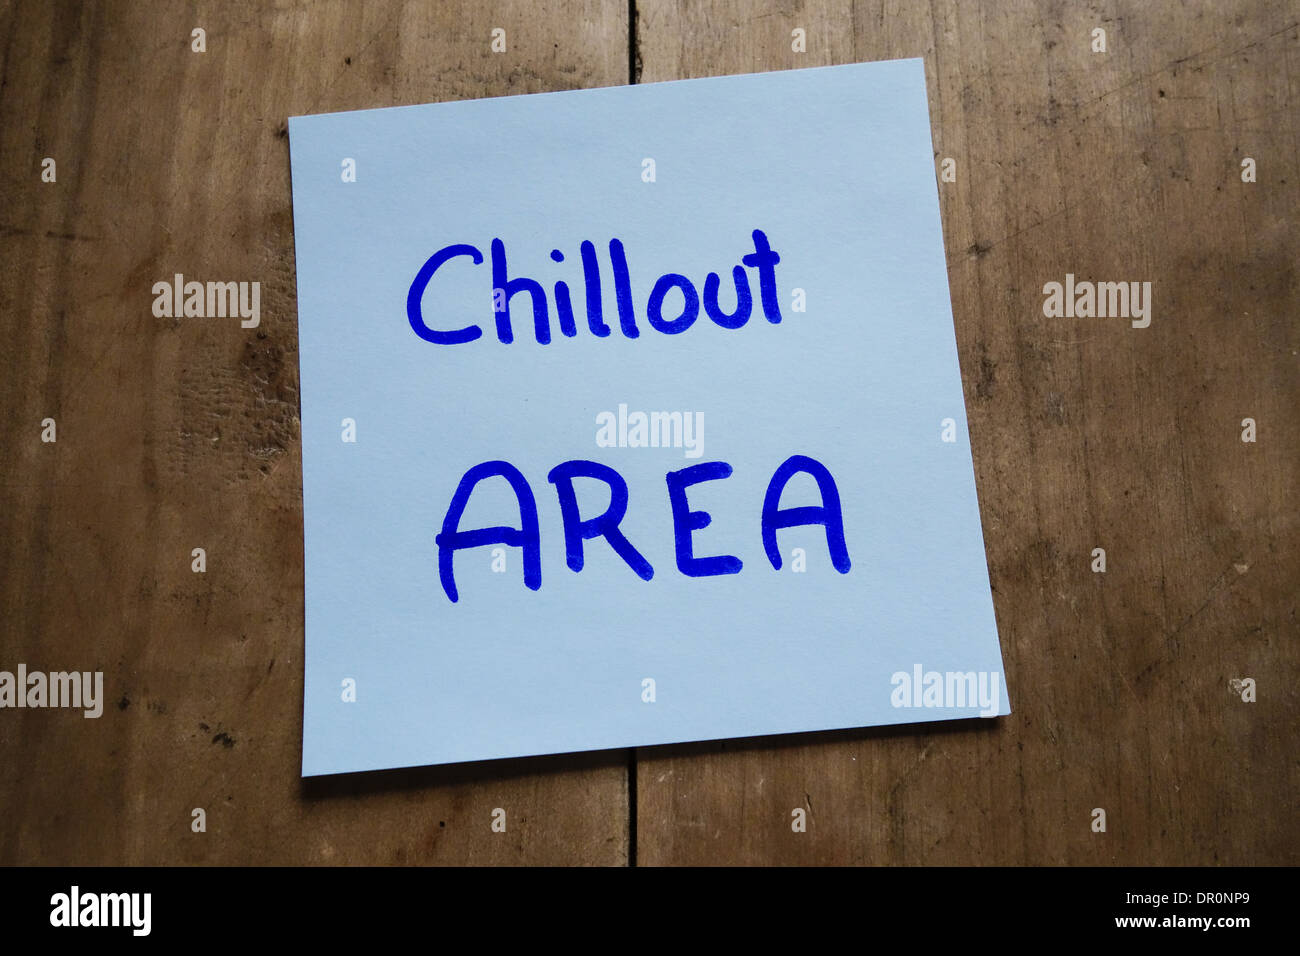 Post it memo on wooden table, Chillout Area Stock Photo